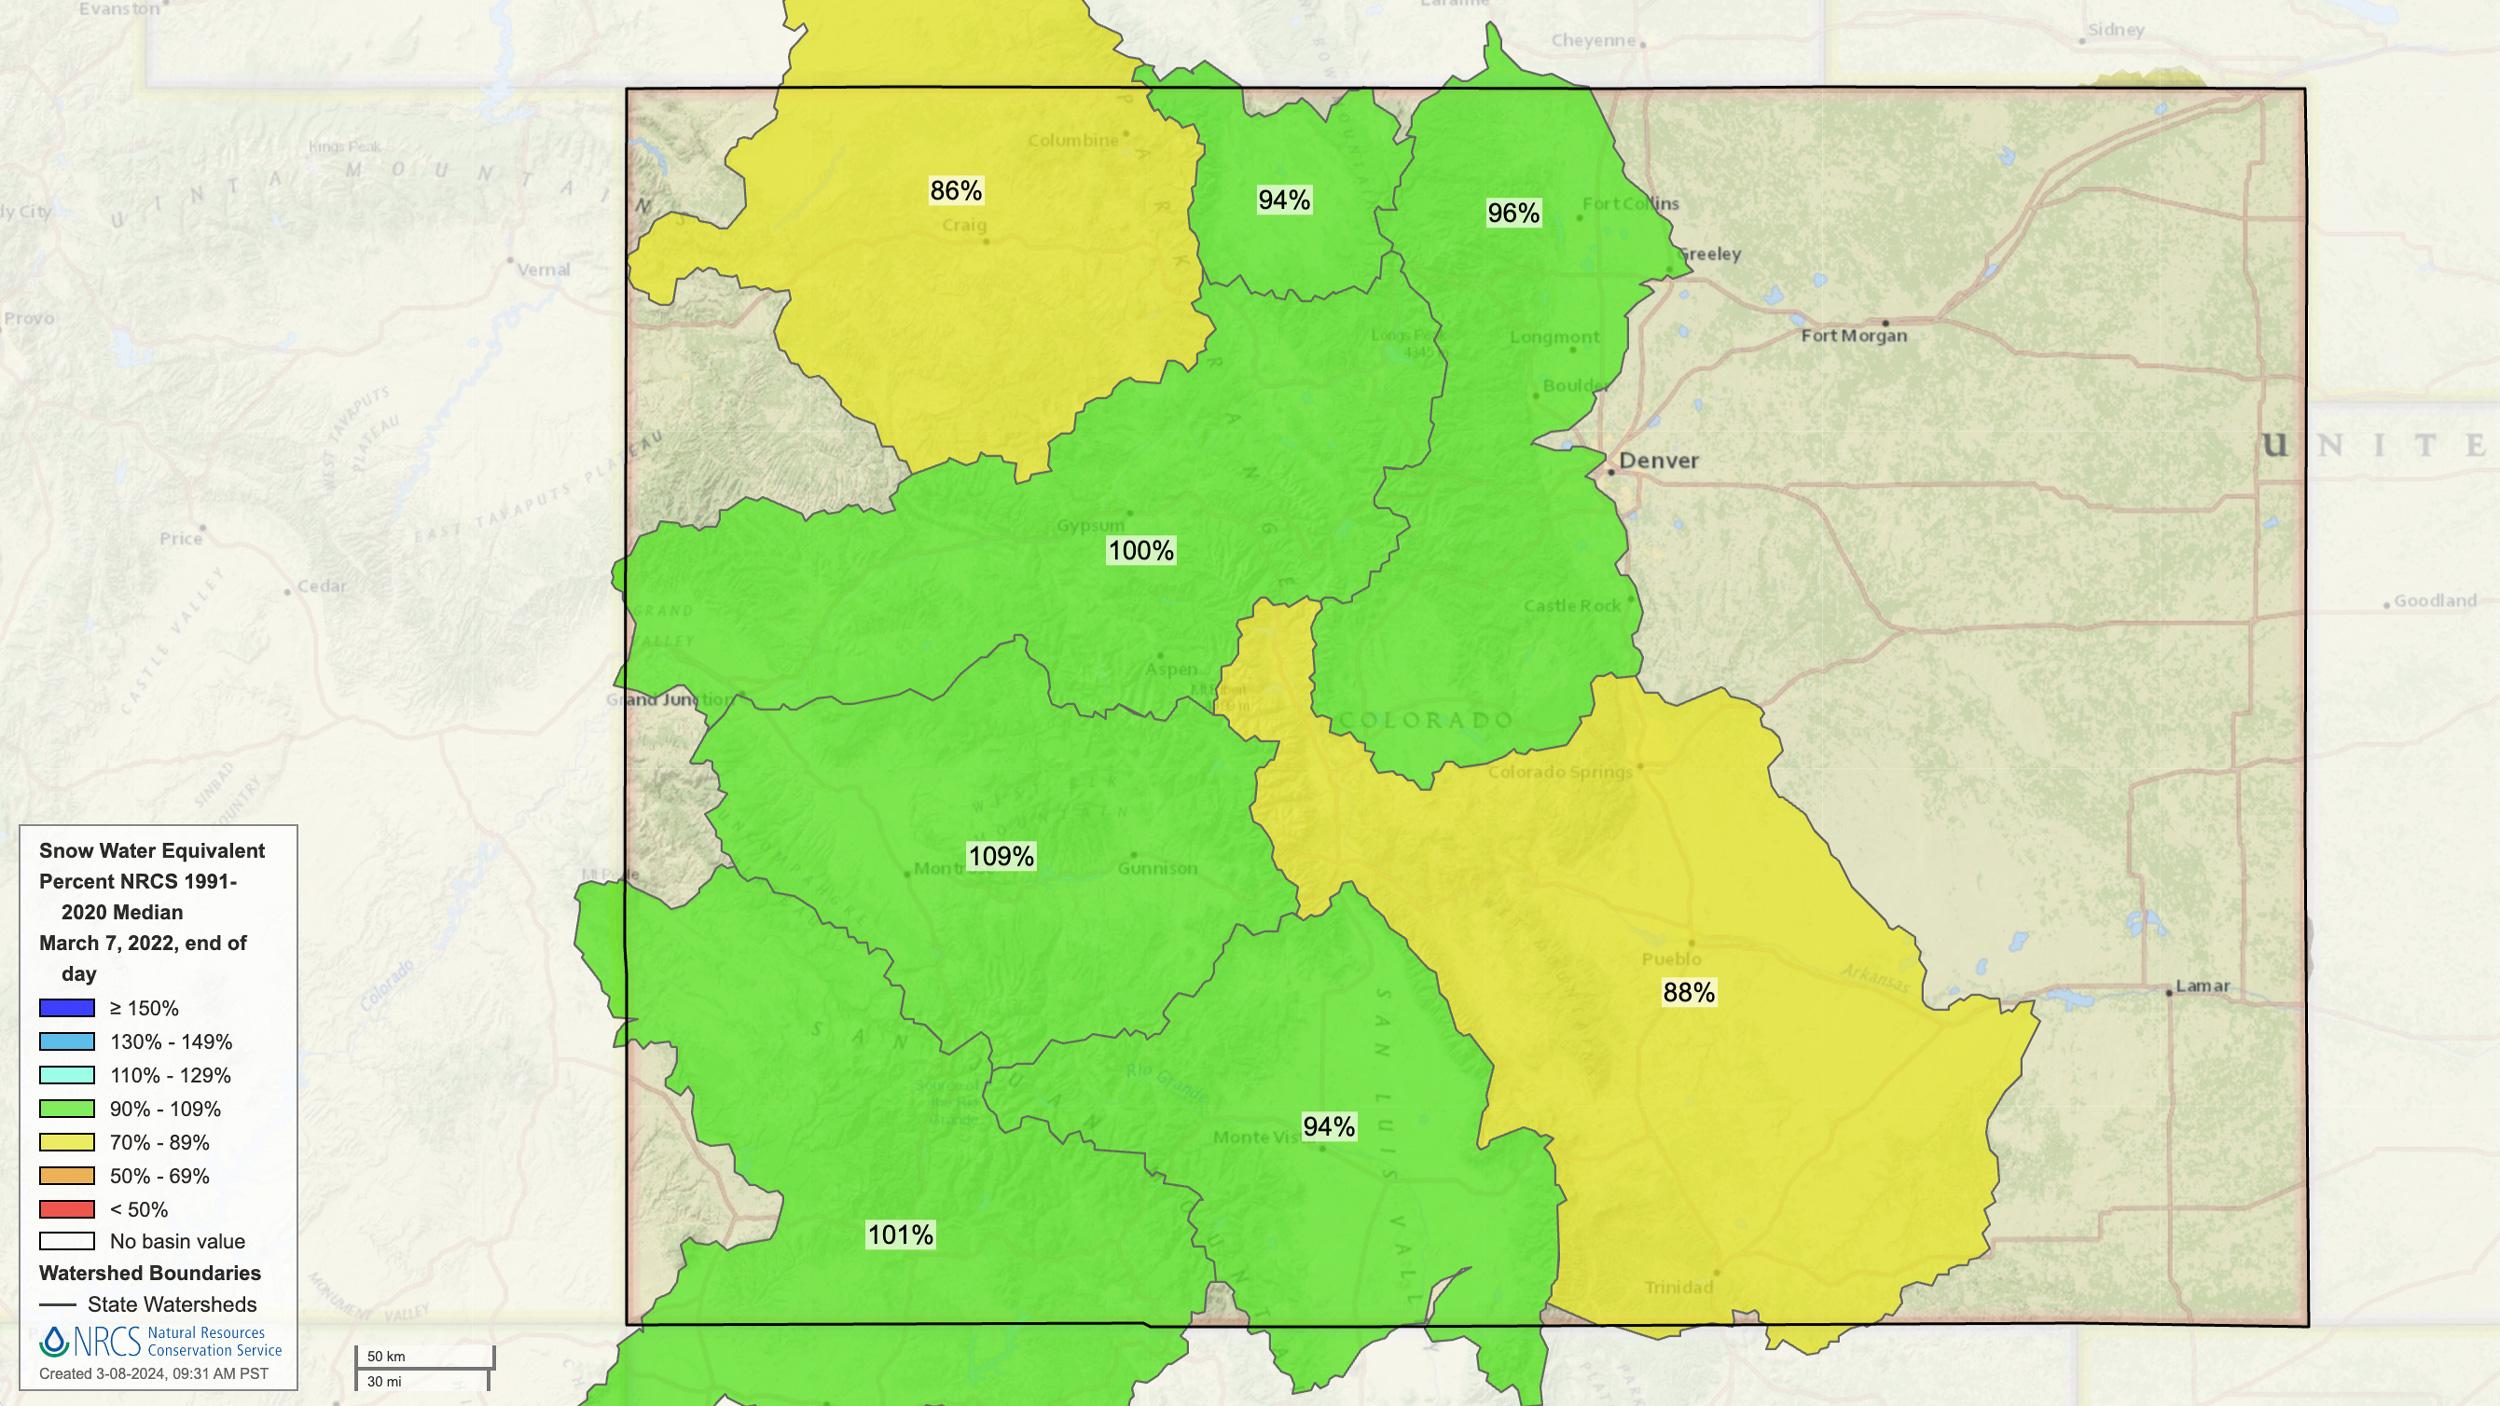 Colorado early March 2022 snow water equivalent map